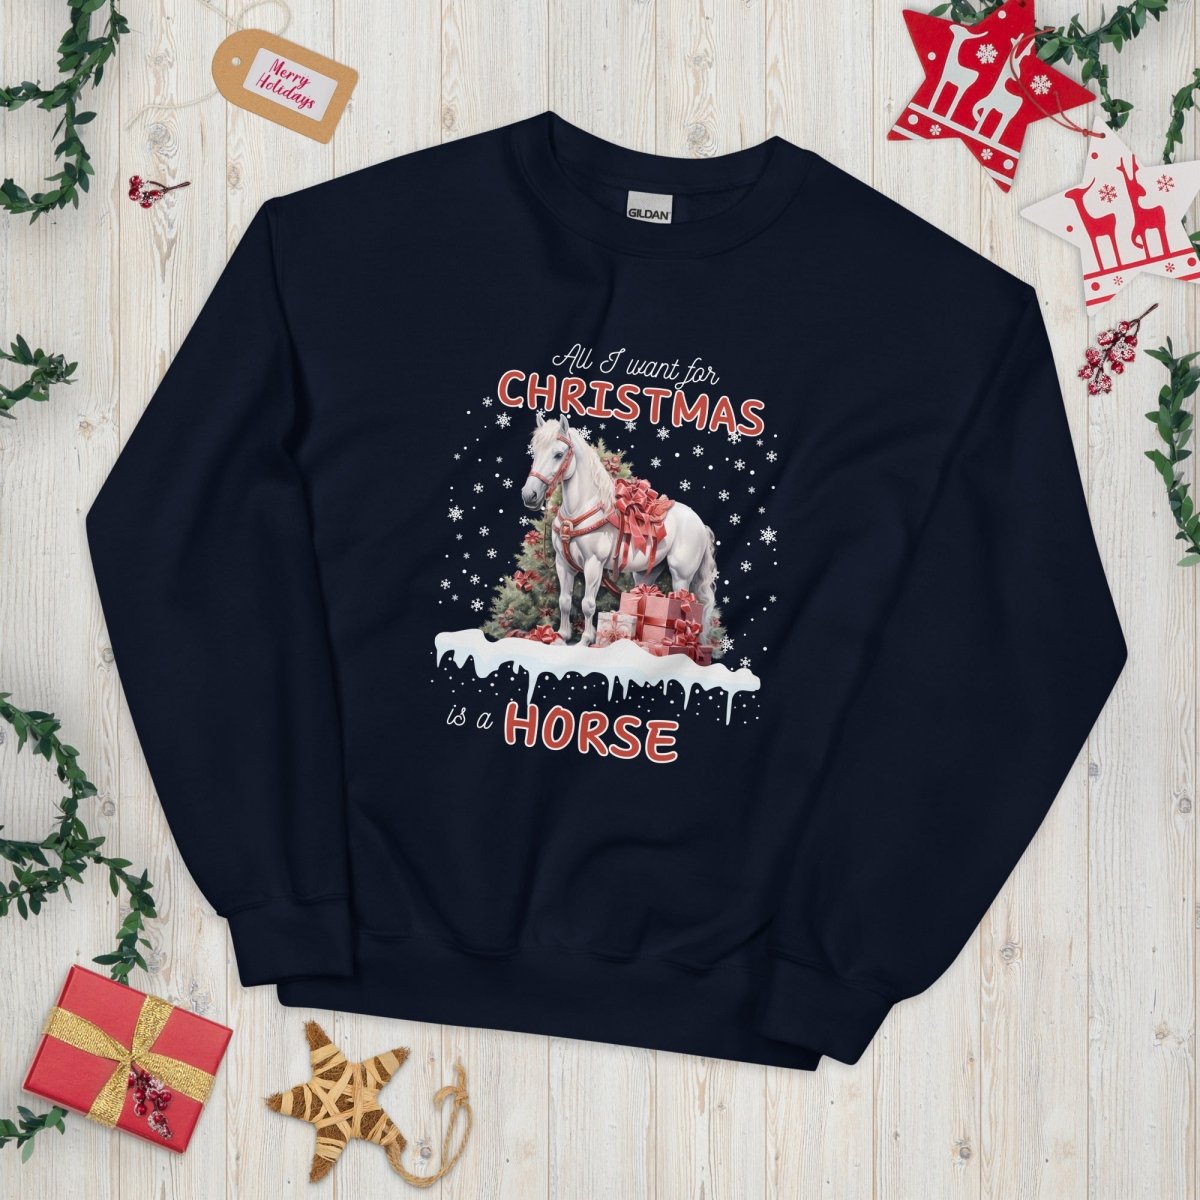 All I Want for Christmas is a Horse Sweater - High Quality Funny Horse Sweatshirt, Funny Gift for Horse Lover, Christmas Holiday Pullover - Everything Pixel